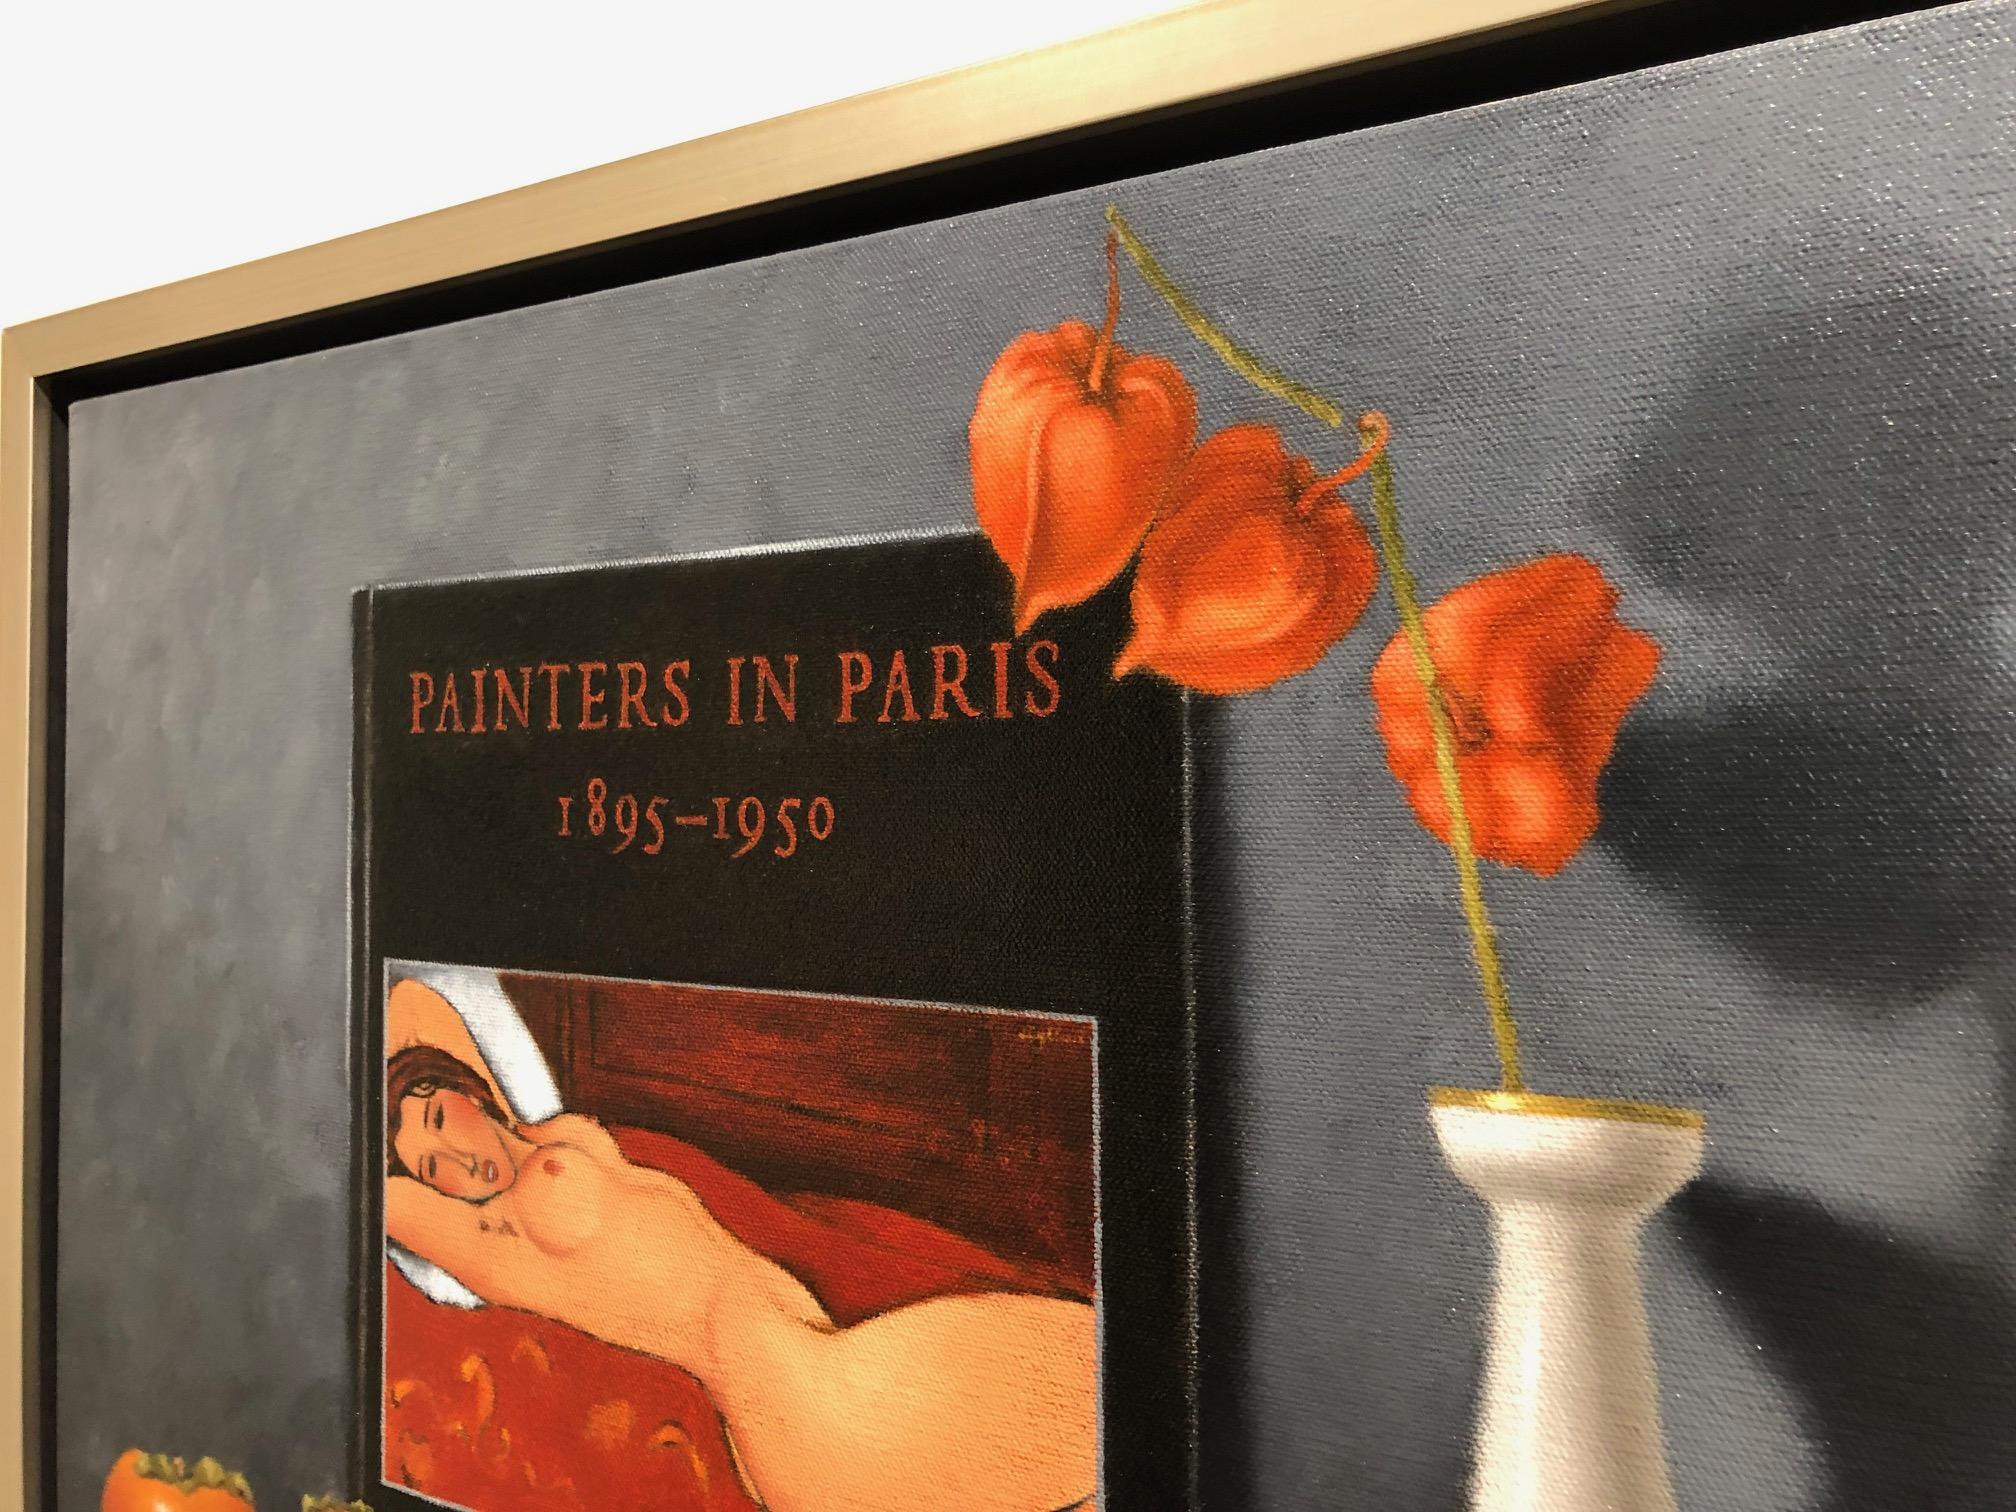 Painters in Paris / oil on canvas with Modigliani  and persimmons - Black Still-Life Painting by Mimi Jensen